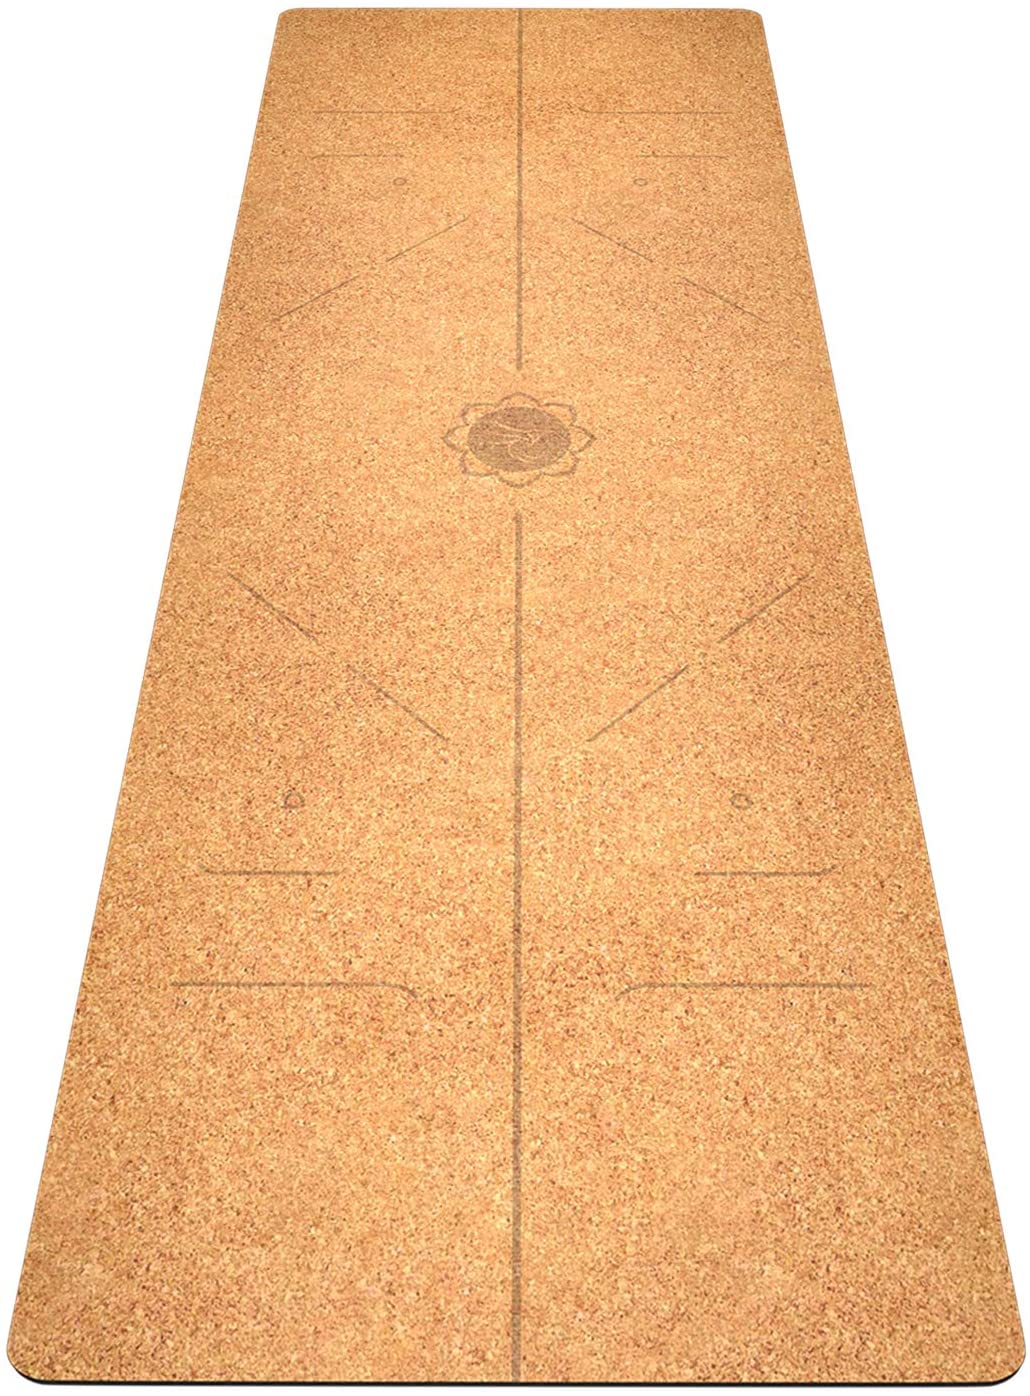 FrenzyBird 5 mm Cork Yoga Mat with Carrying Strap | YogaMatStore